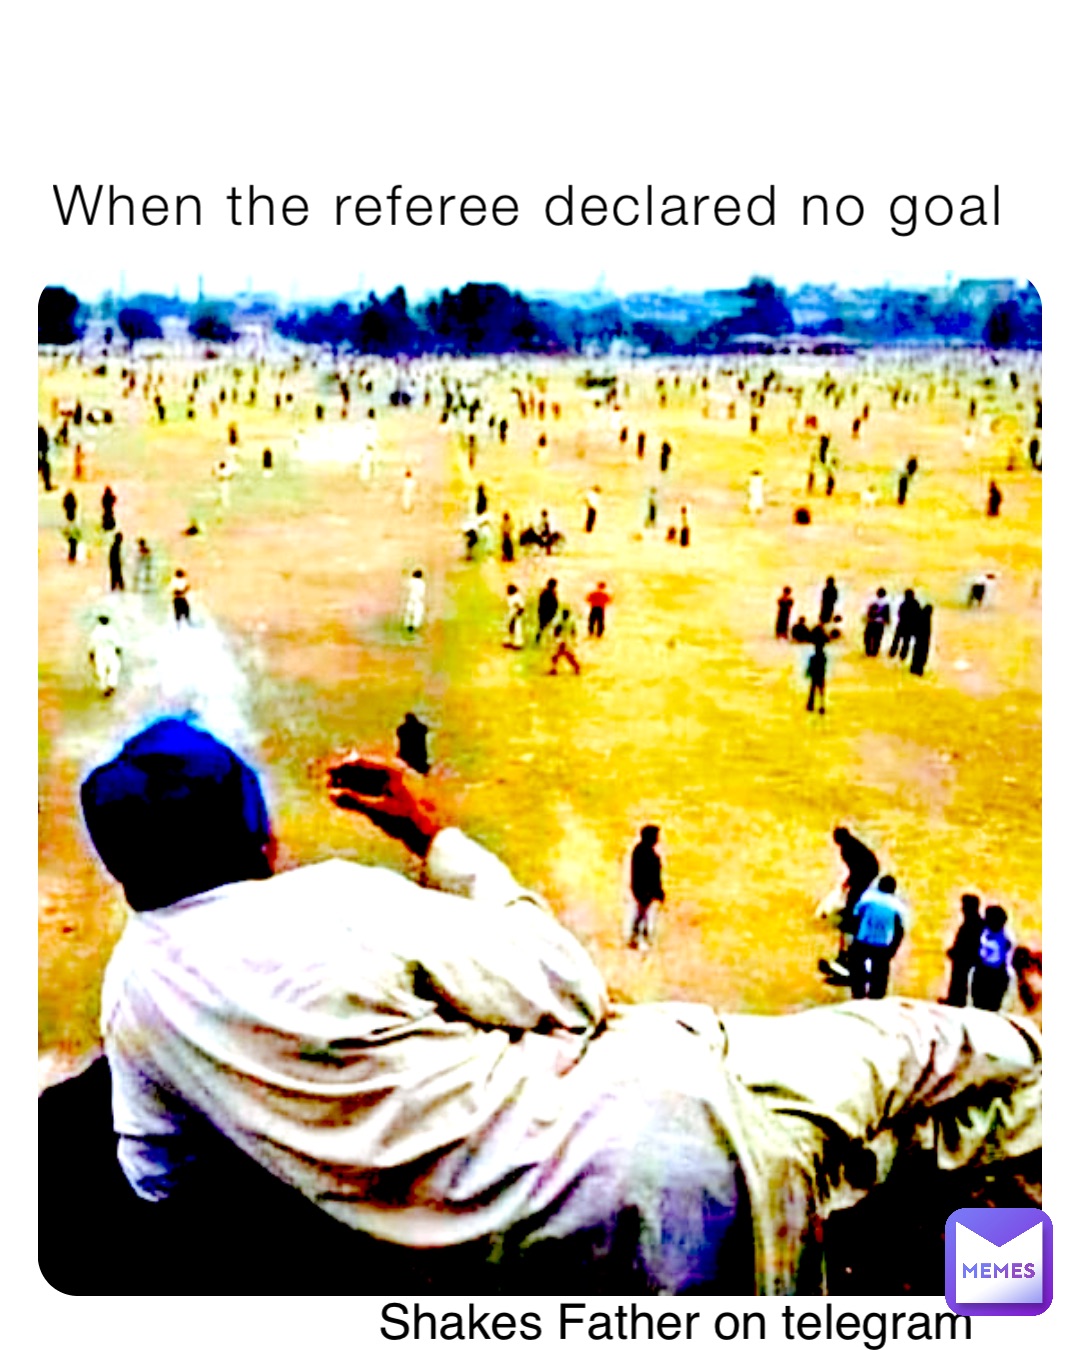 When the referee declared no goal Shakes Father on telegram